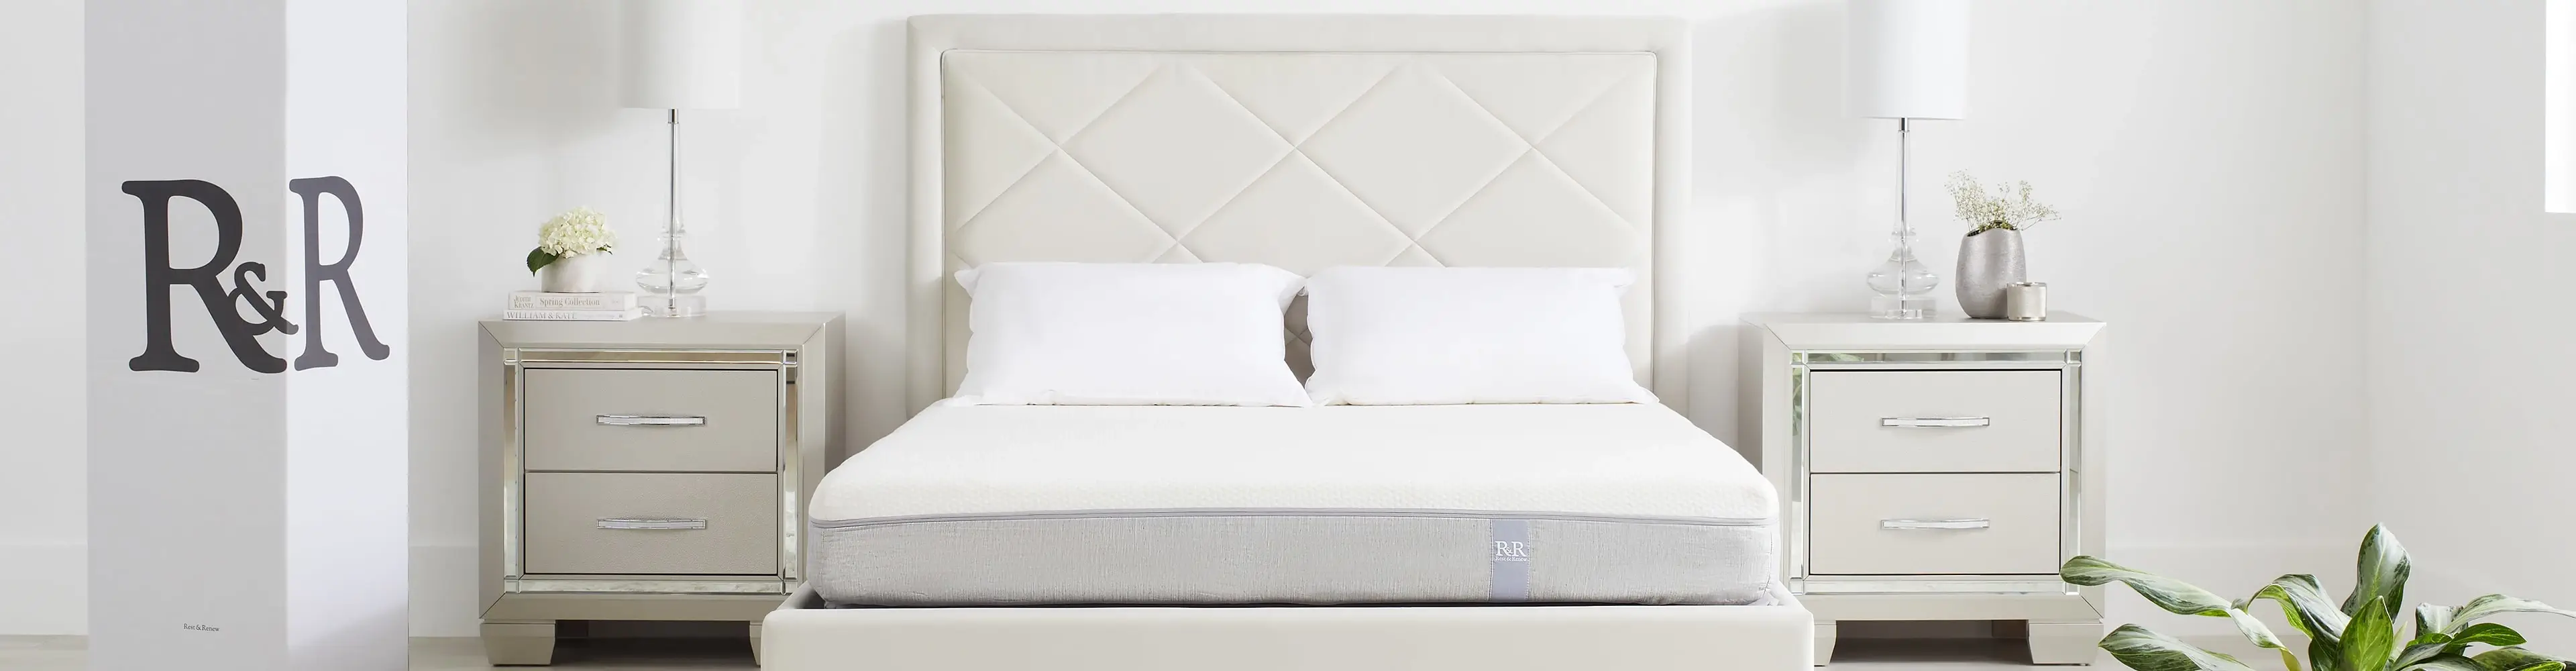 Time For A Change: Understanding The Lifecycle Of A Mattress For Better Sleep